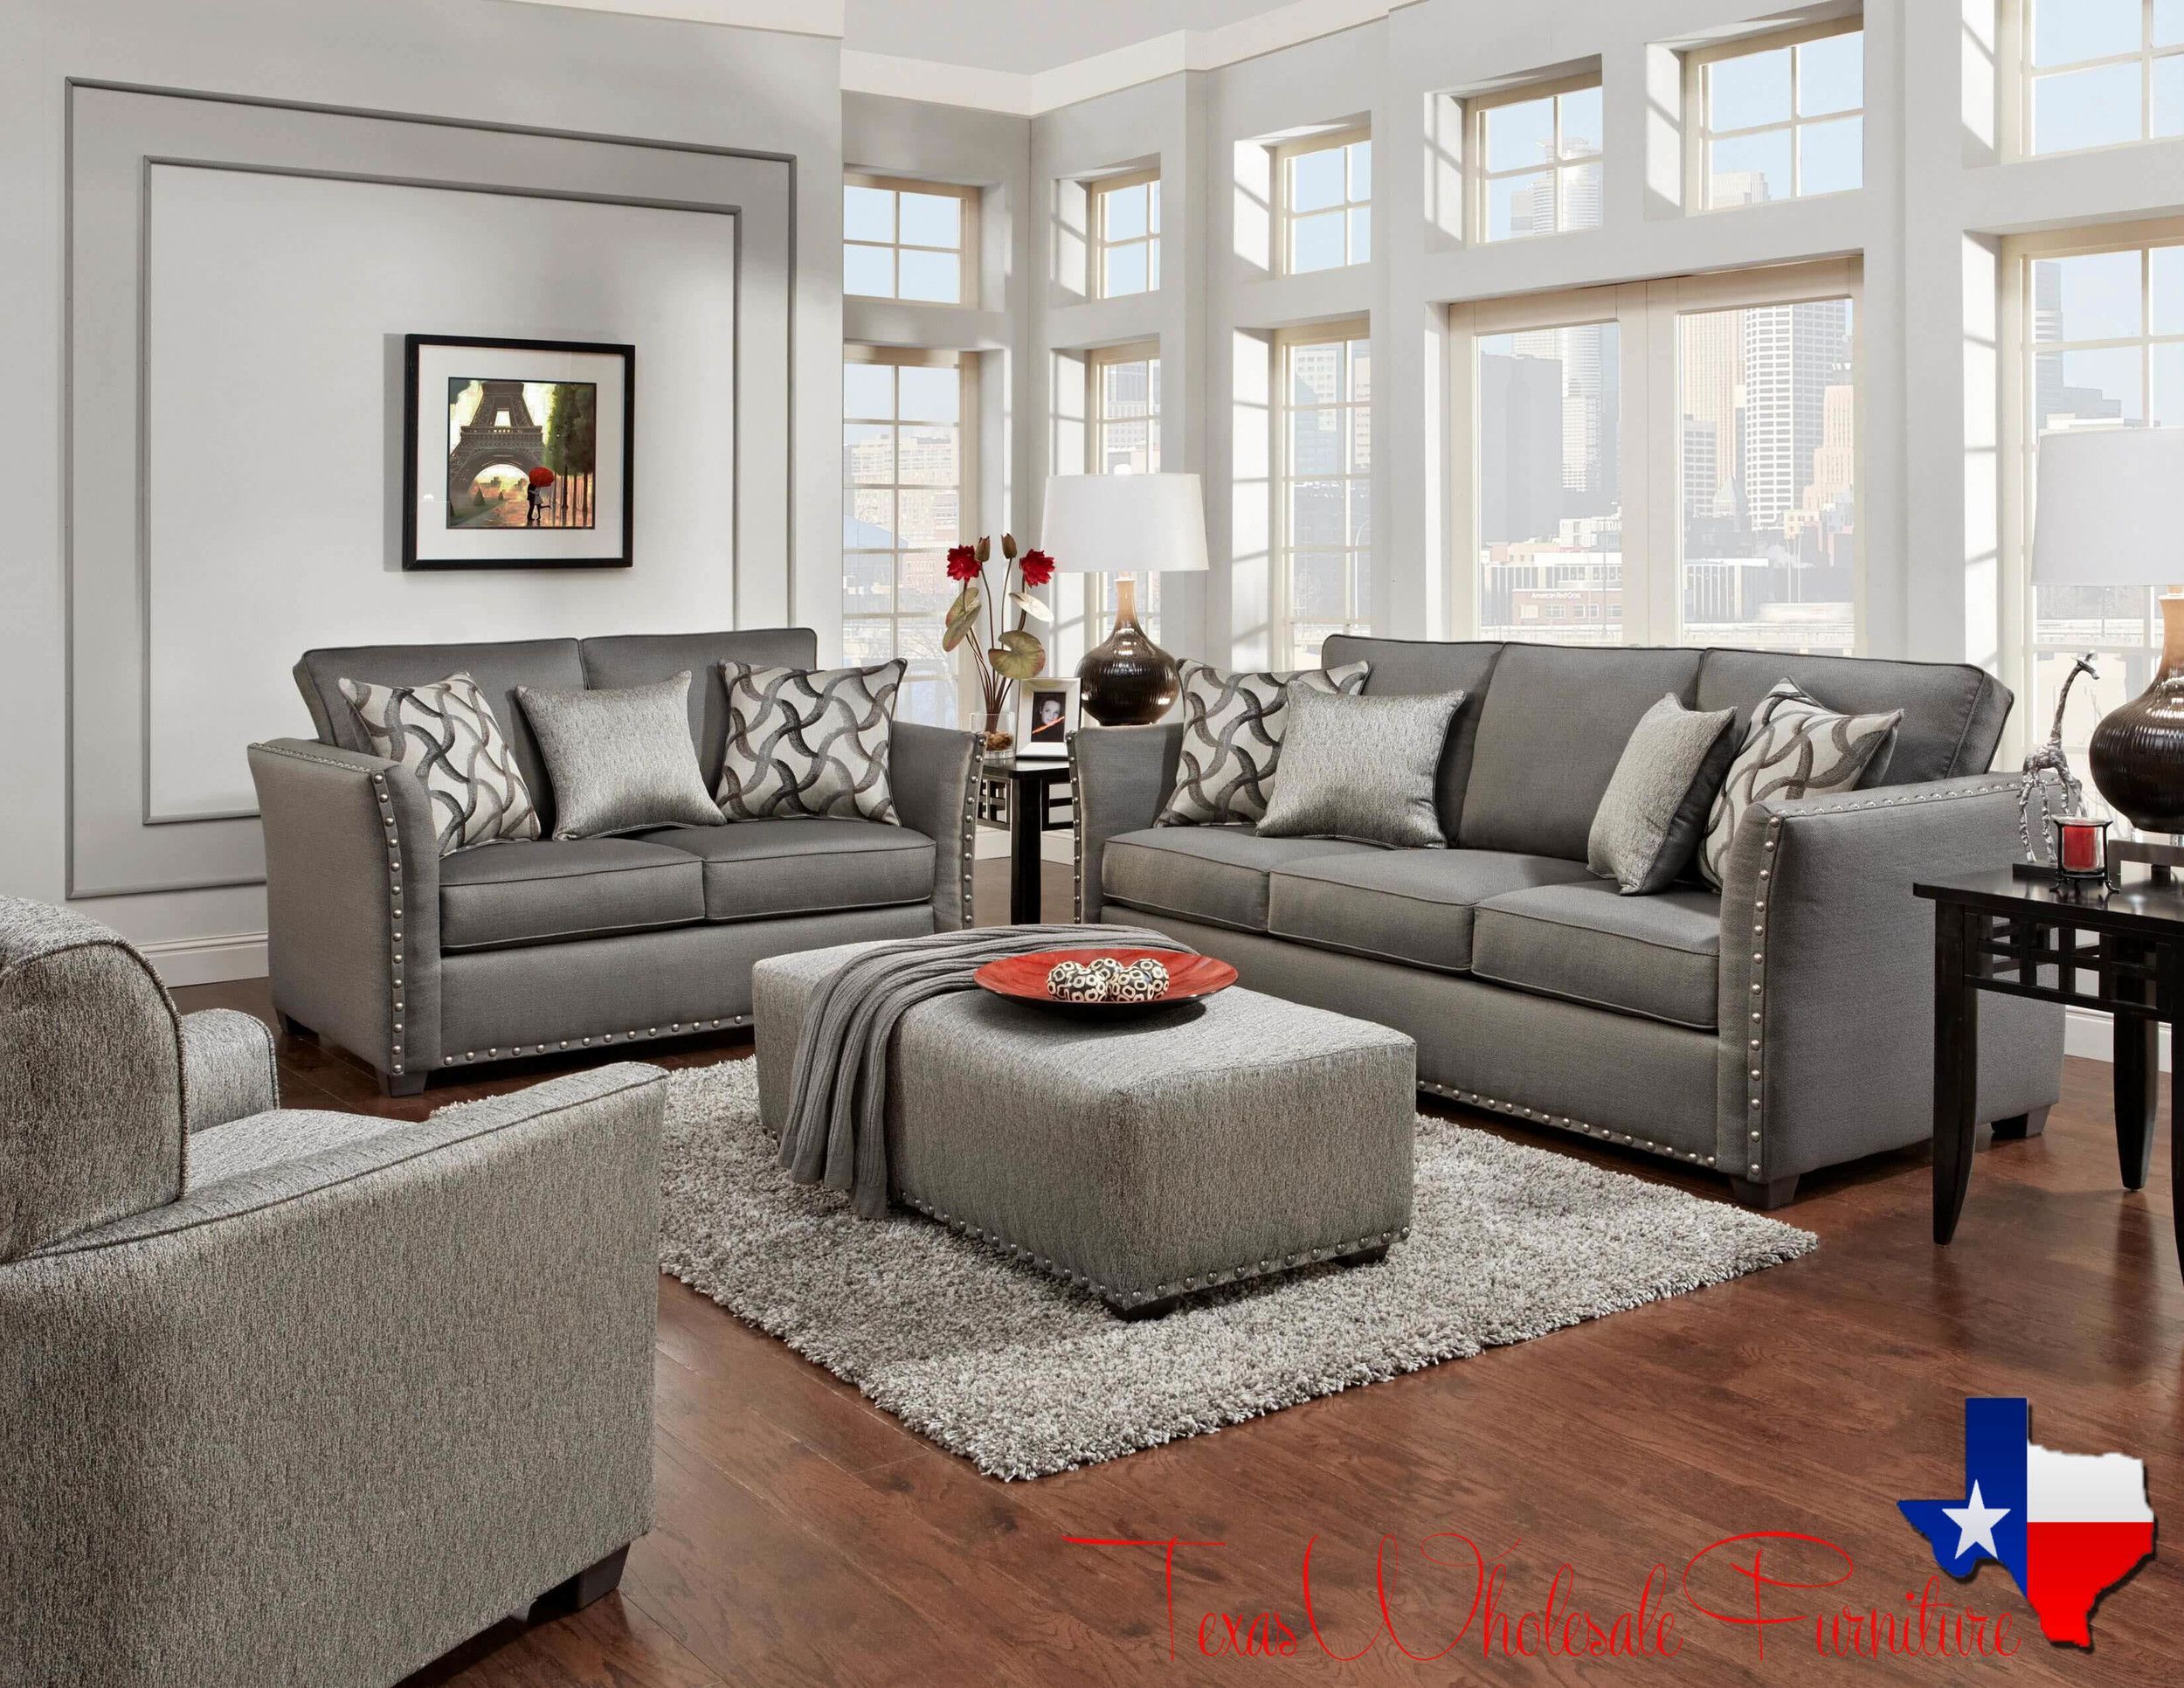 Washington 1380 — Texas Wholesale Furniture Co | Living Room Designs Pertaining To Sofas For Living Rooms (View 20 of 20)